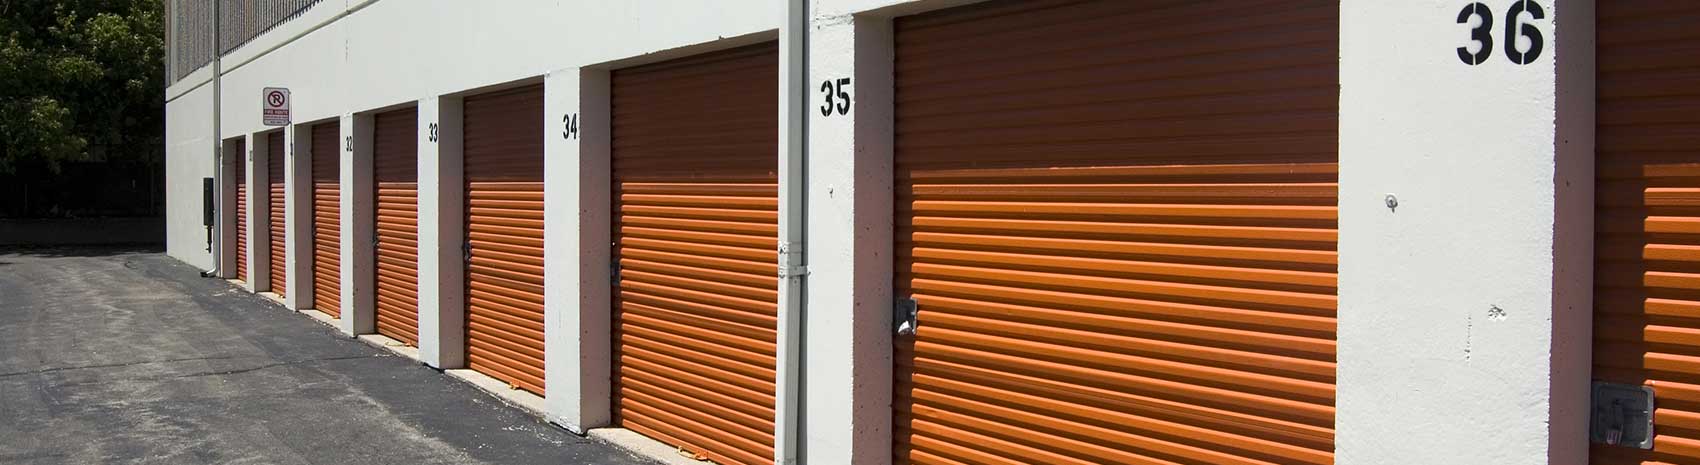 Commercial garage doors for facilities such as storage units